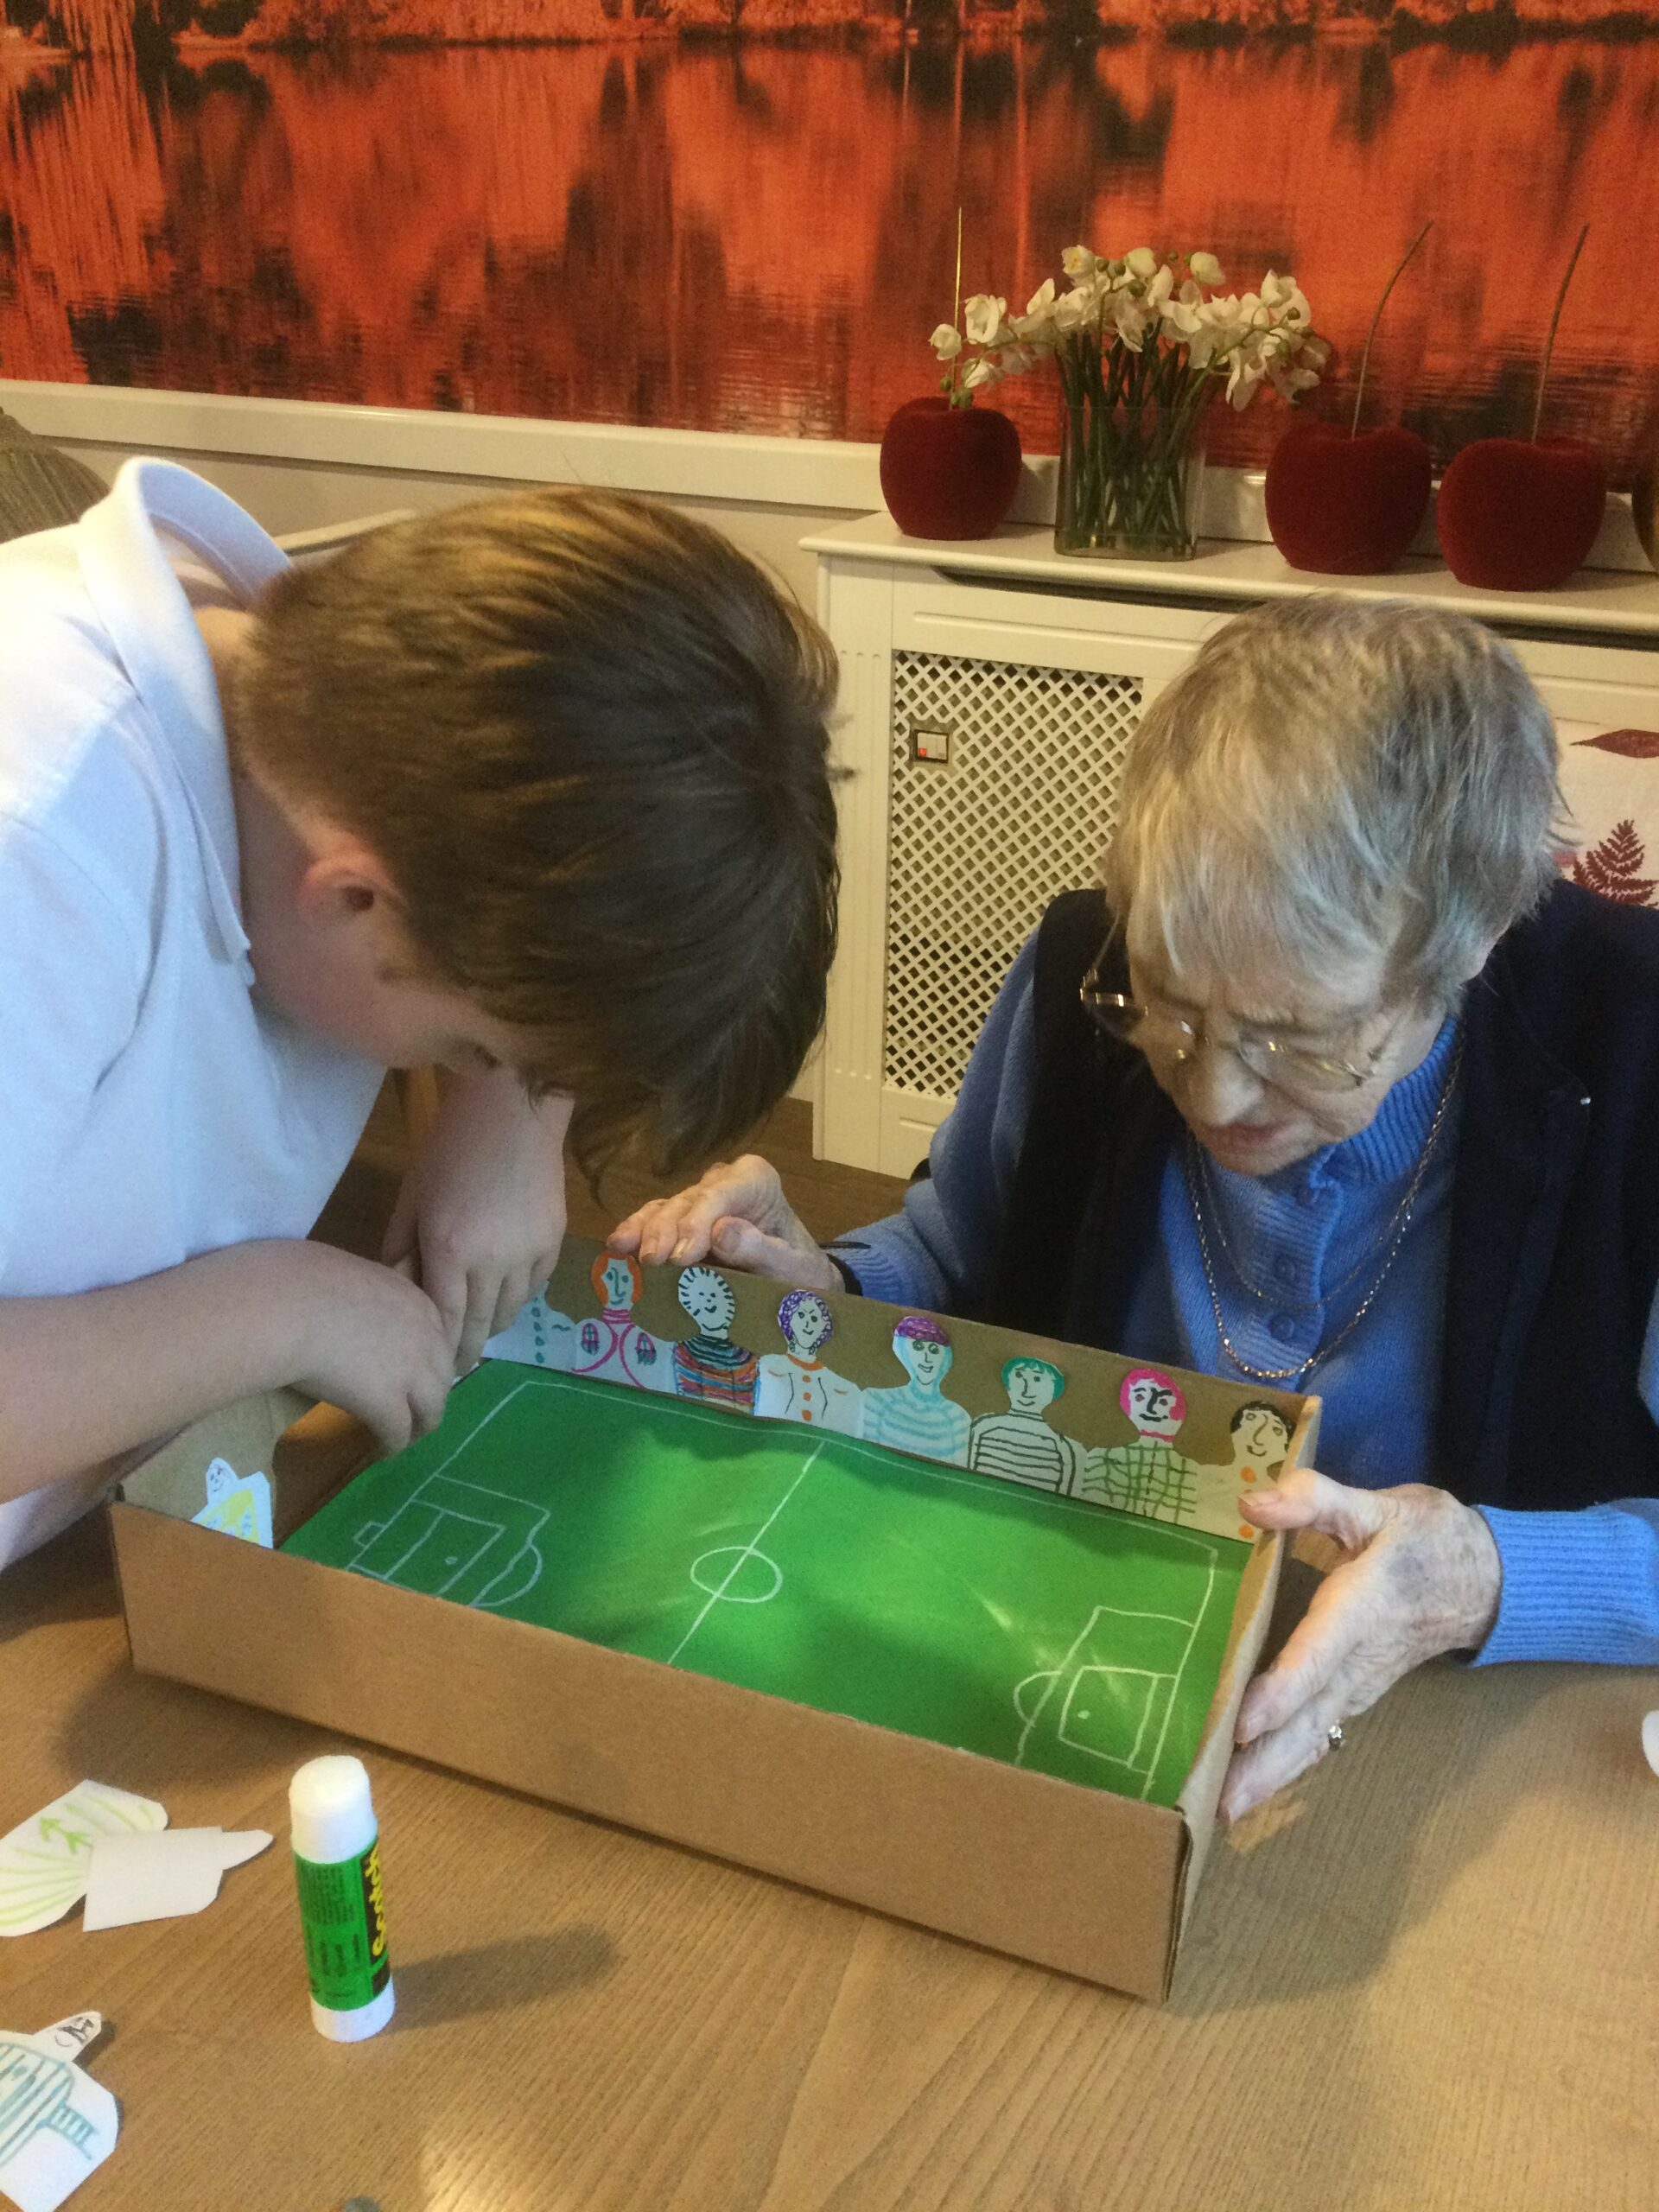 A woman and young lad working together to create a handmade football game